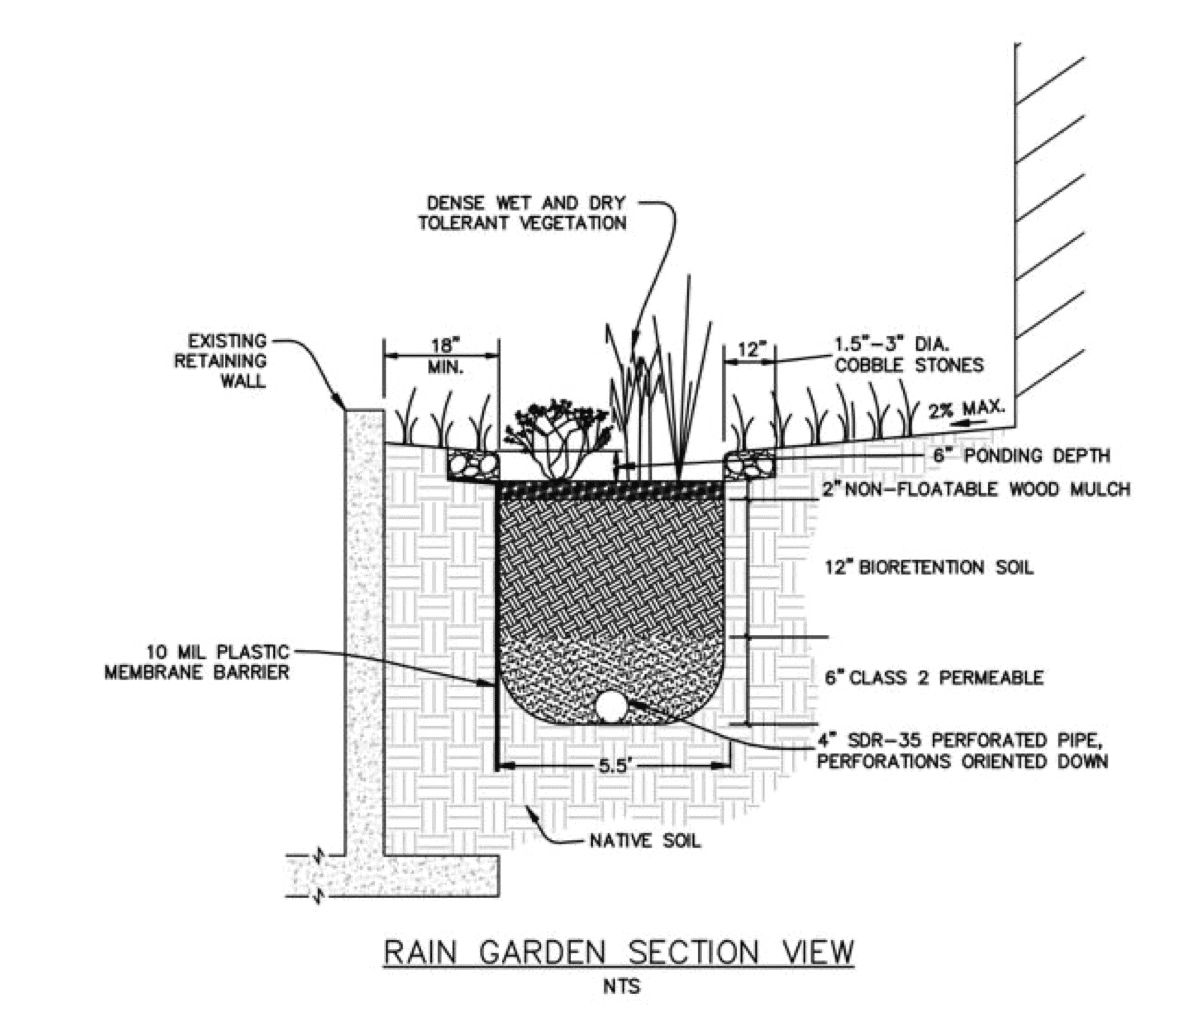 Sample of a specialized garden design drawing for the construction of a rain garden 